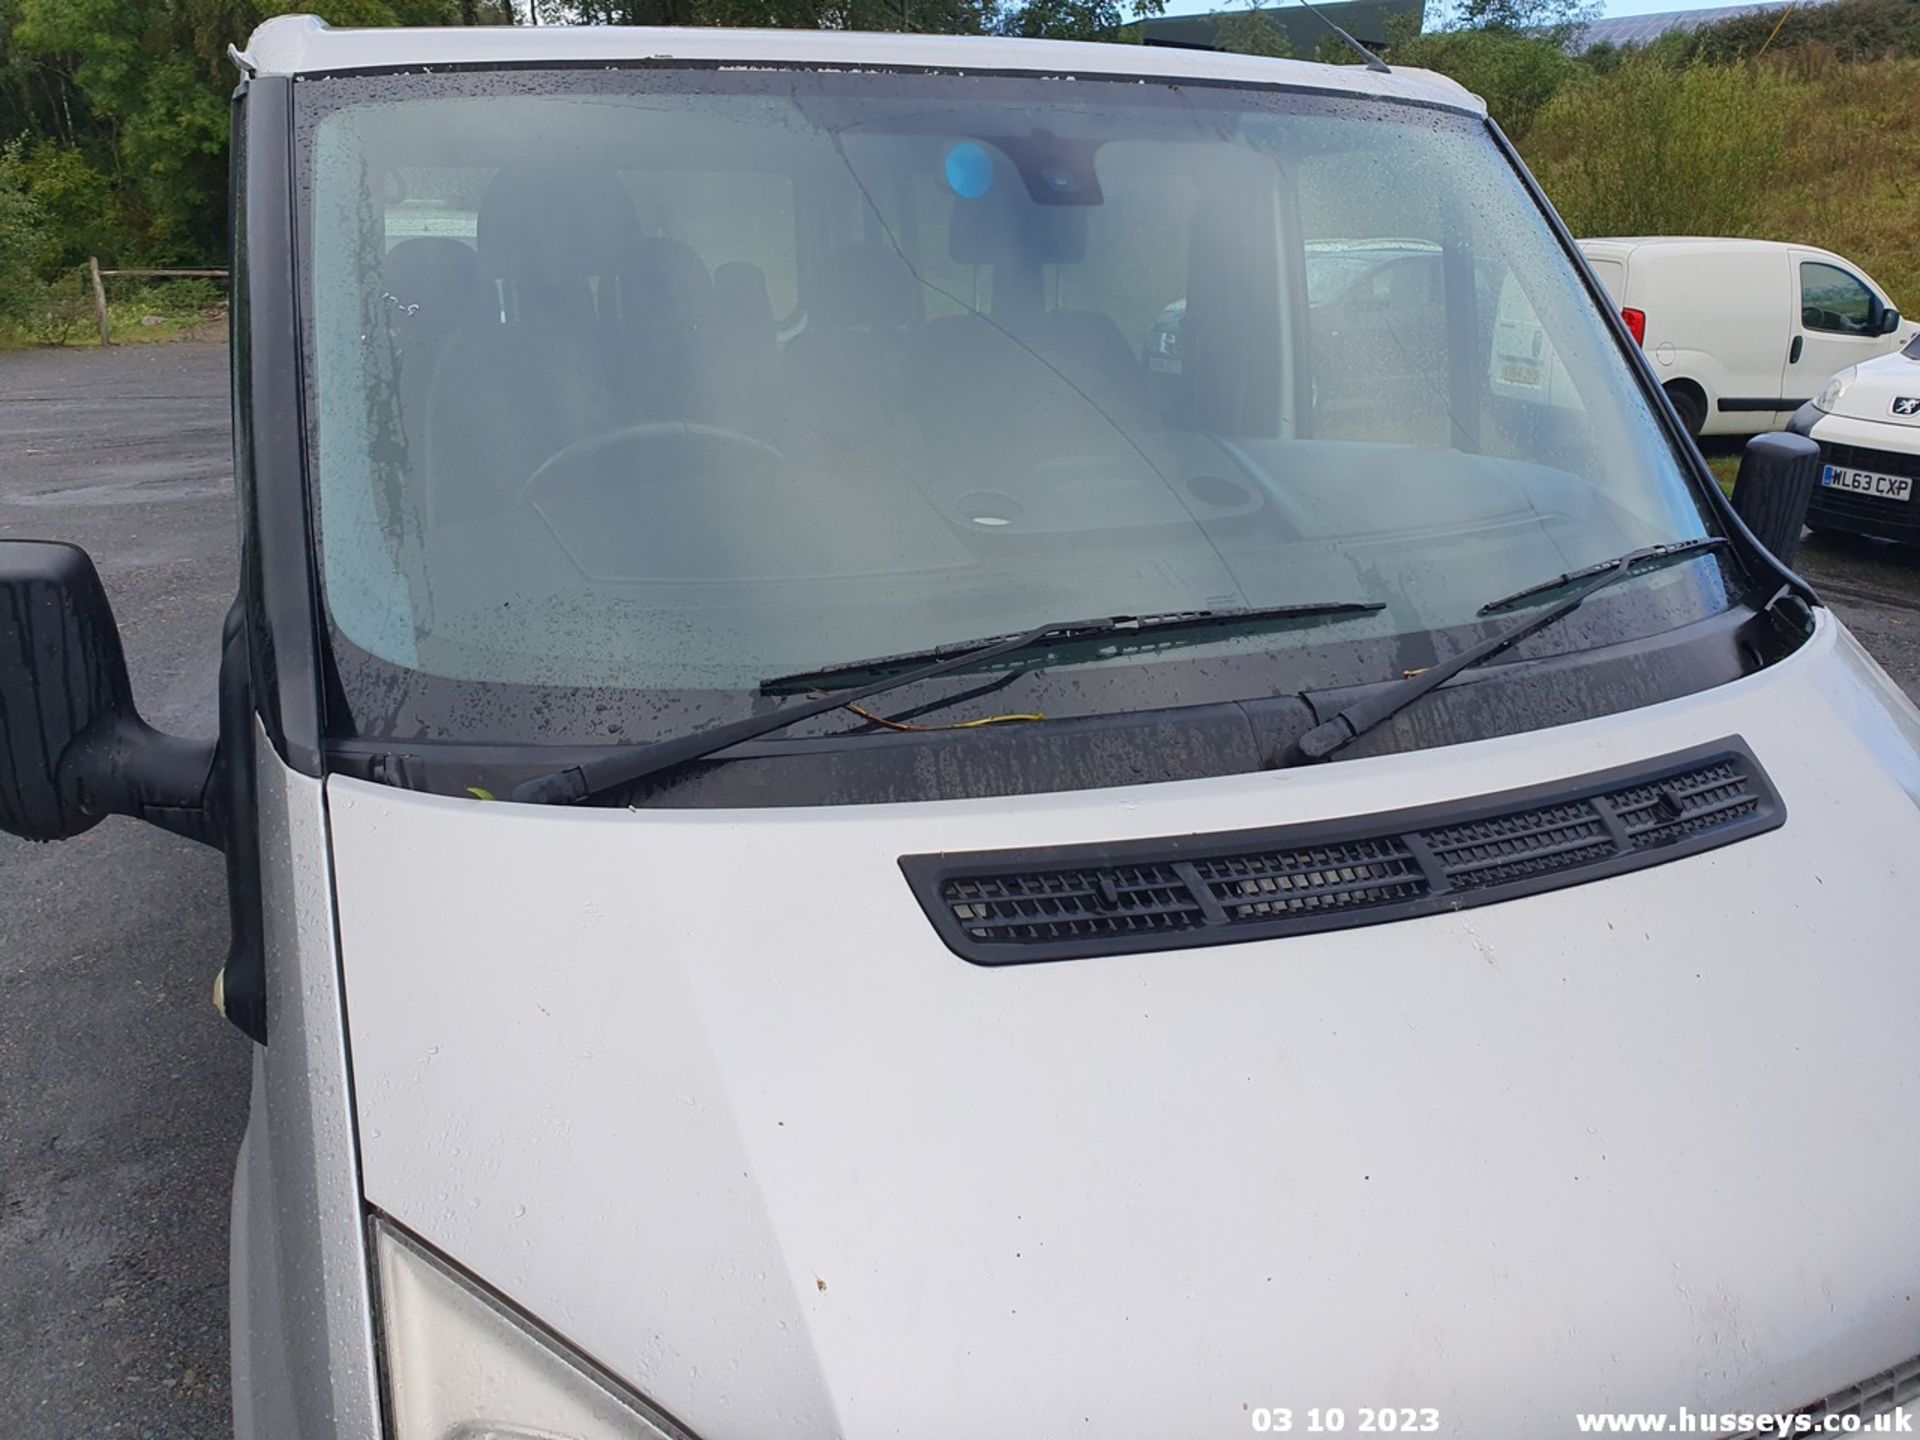 13/62 FORD TRANSIT 125 T280 FWD - 2198cc 5dr MPV (Silver, 146k) - Image 29 of 65